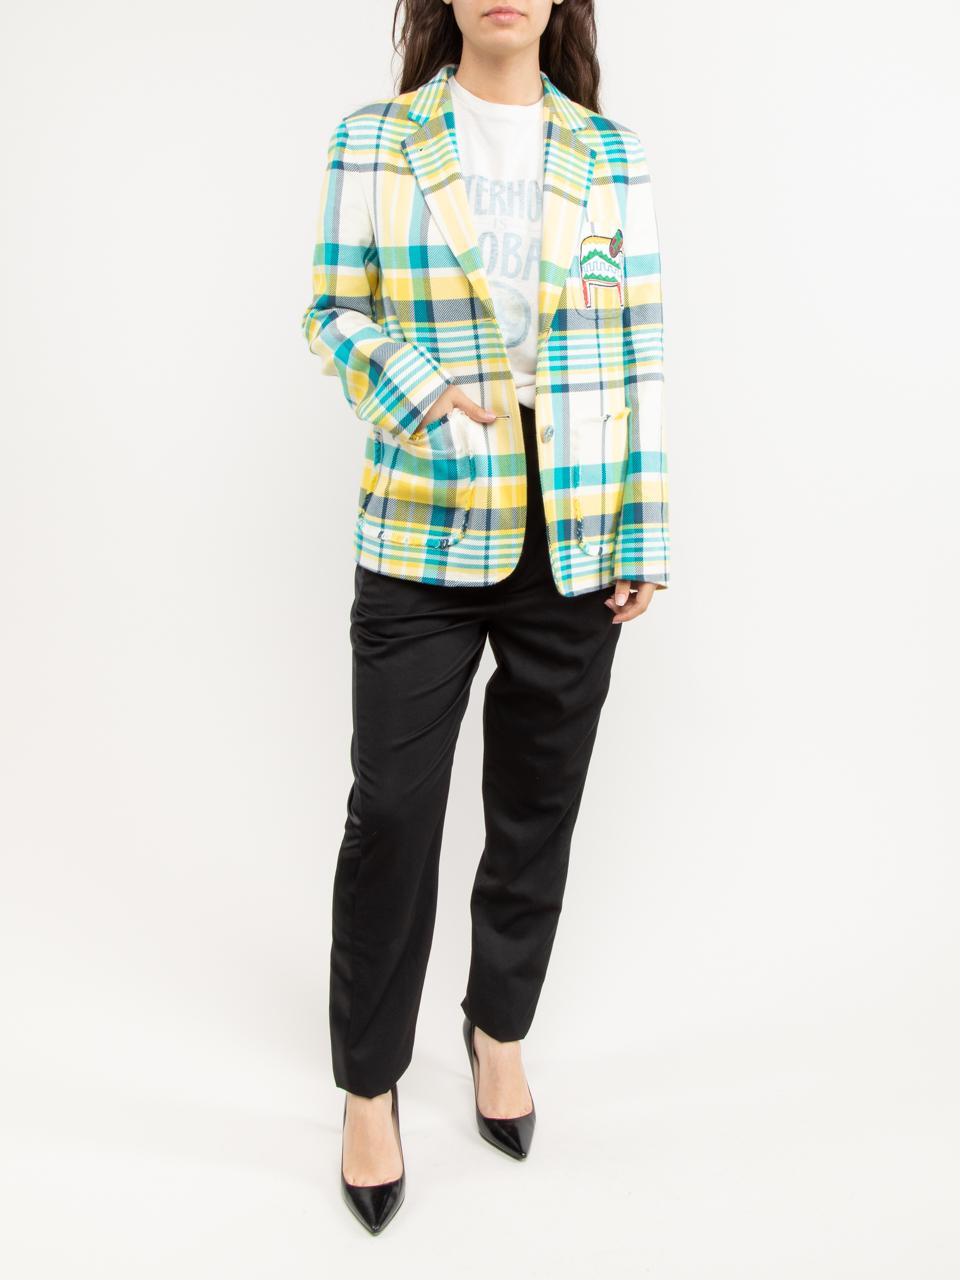 CONDITION is Very good. No visible wear to blazer is evident on this used Mira Mikati designer resale item. Details Colour - multi Plaid print Material - cotton Sleeves - long V-Neckline Fastening - 2 Buttons 2 x hip pockets Interior lining -